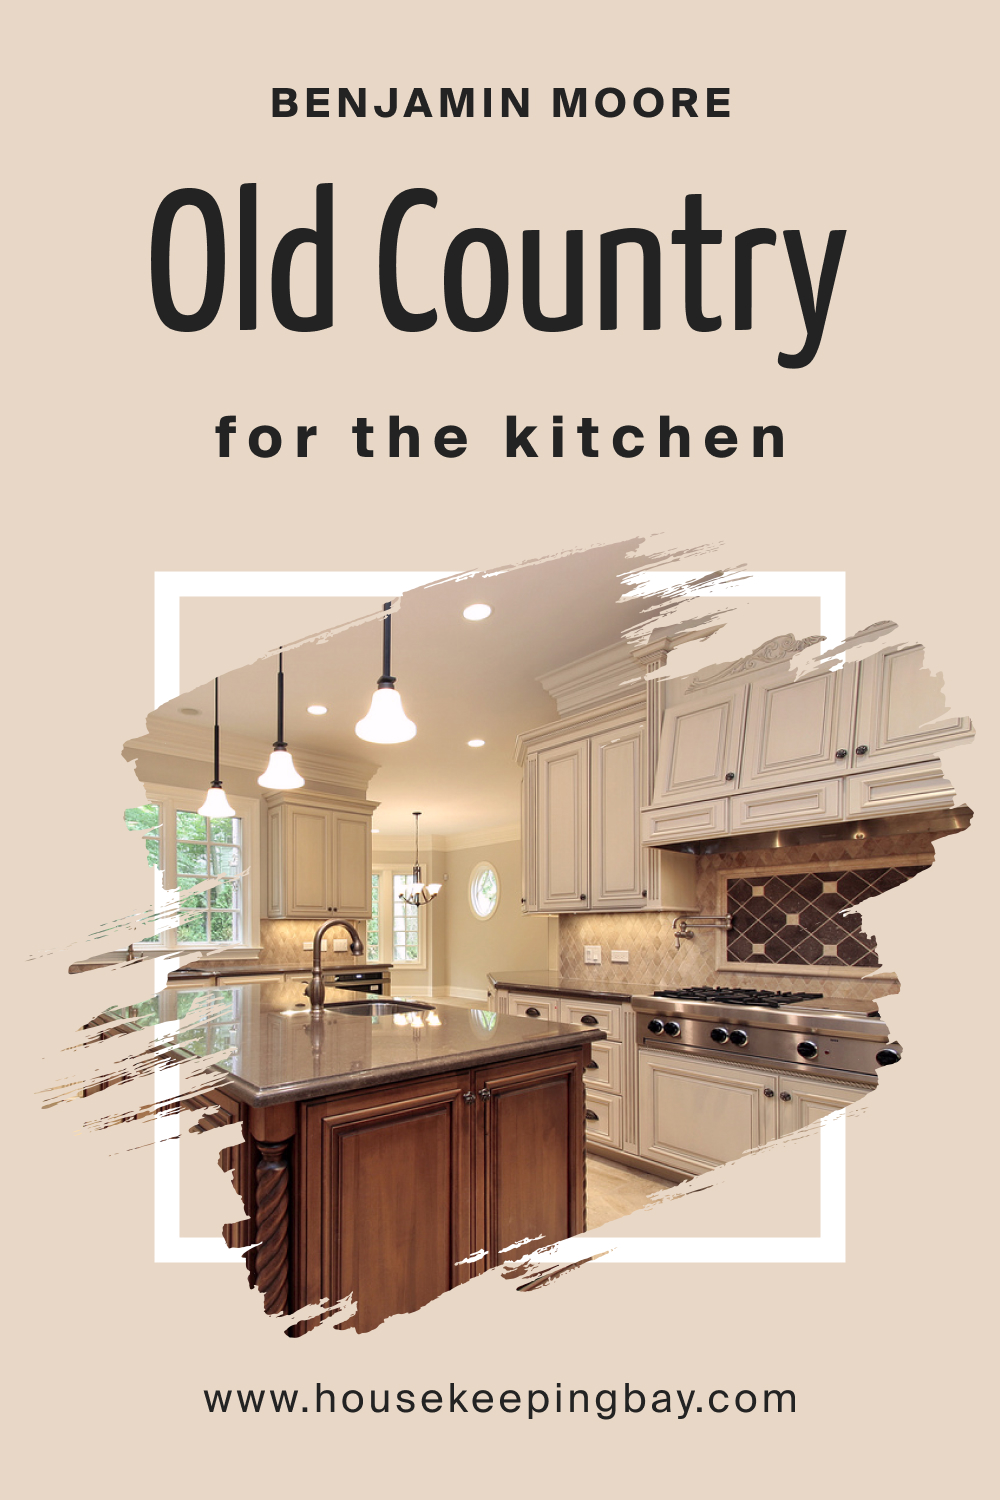 Benjamin Moore. Old Country OC 76 for the Kitchen